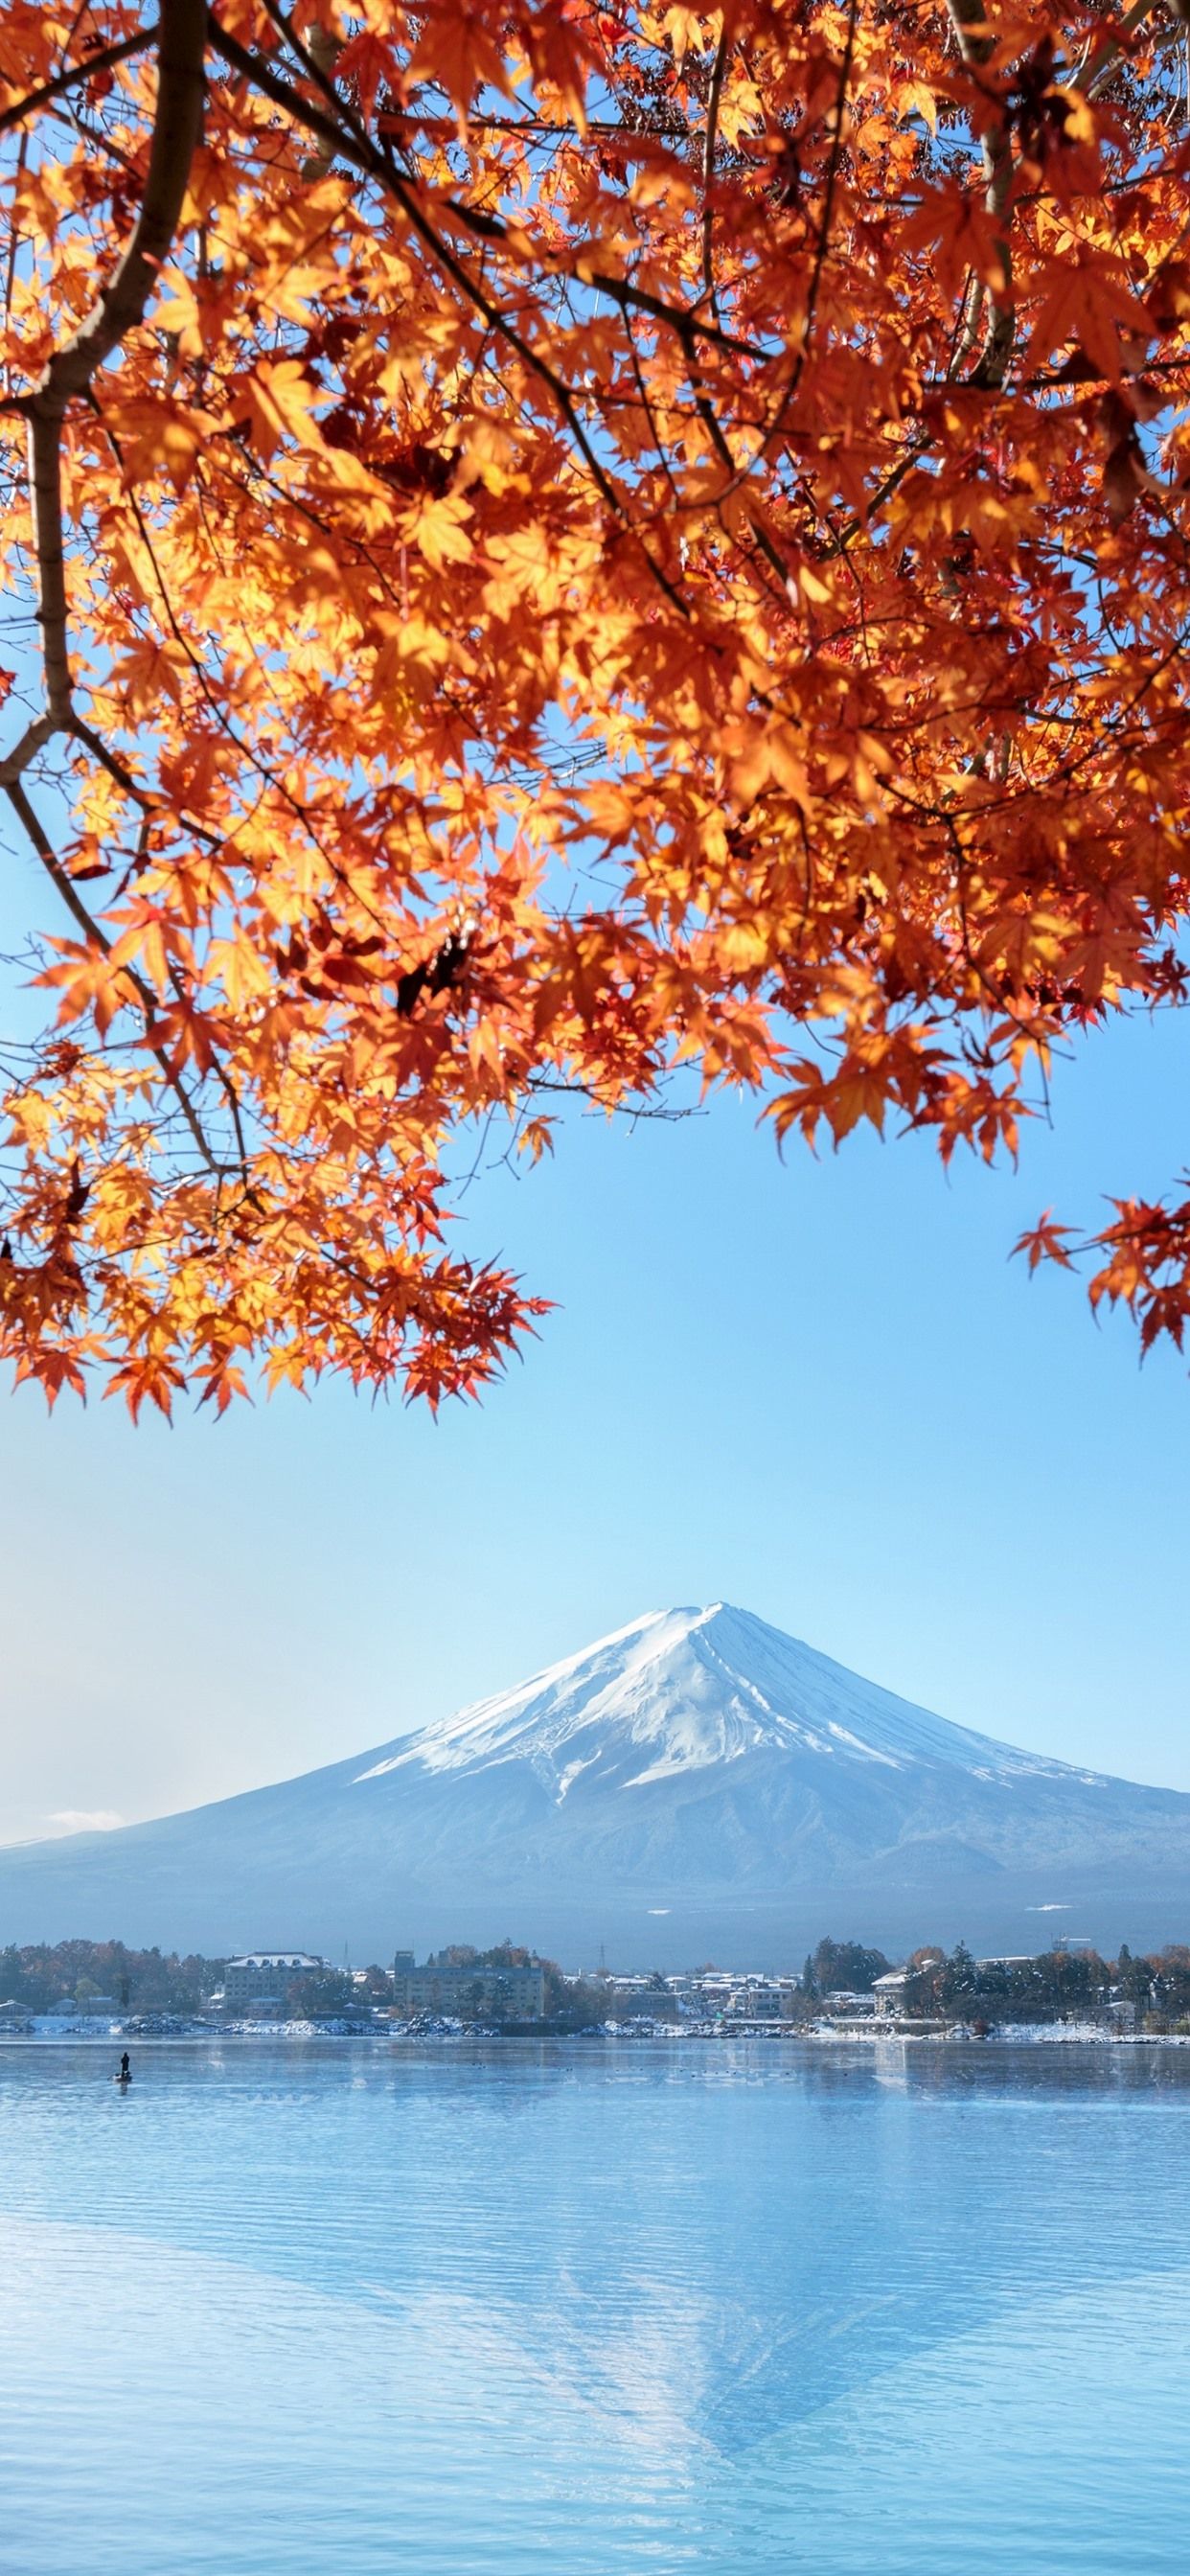 Fuji Mountain, Red Maple Leaves, Lake, Autumn, Japan 1242x2688 IPhone 11 Pro XS Max Wallpaper, Background, Picture, Image